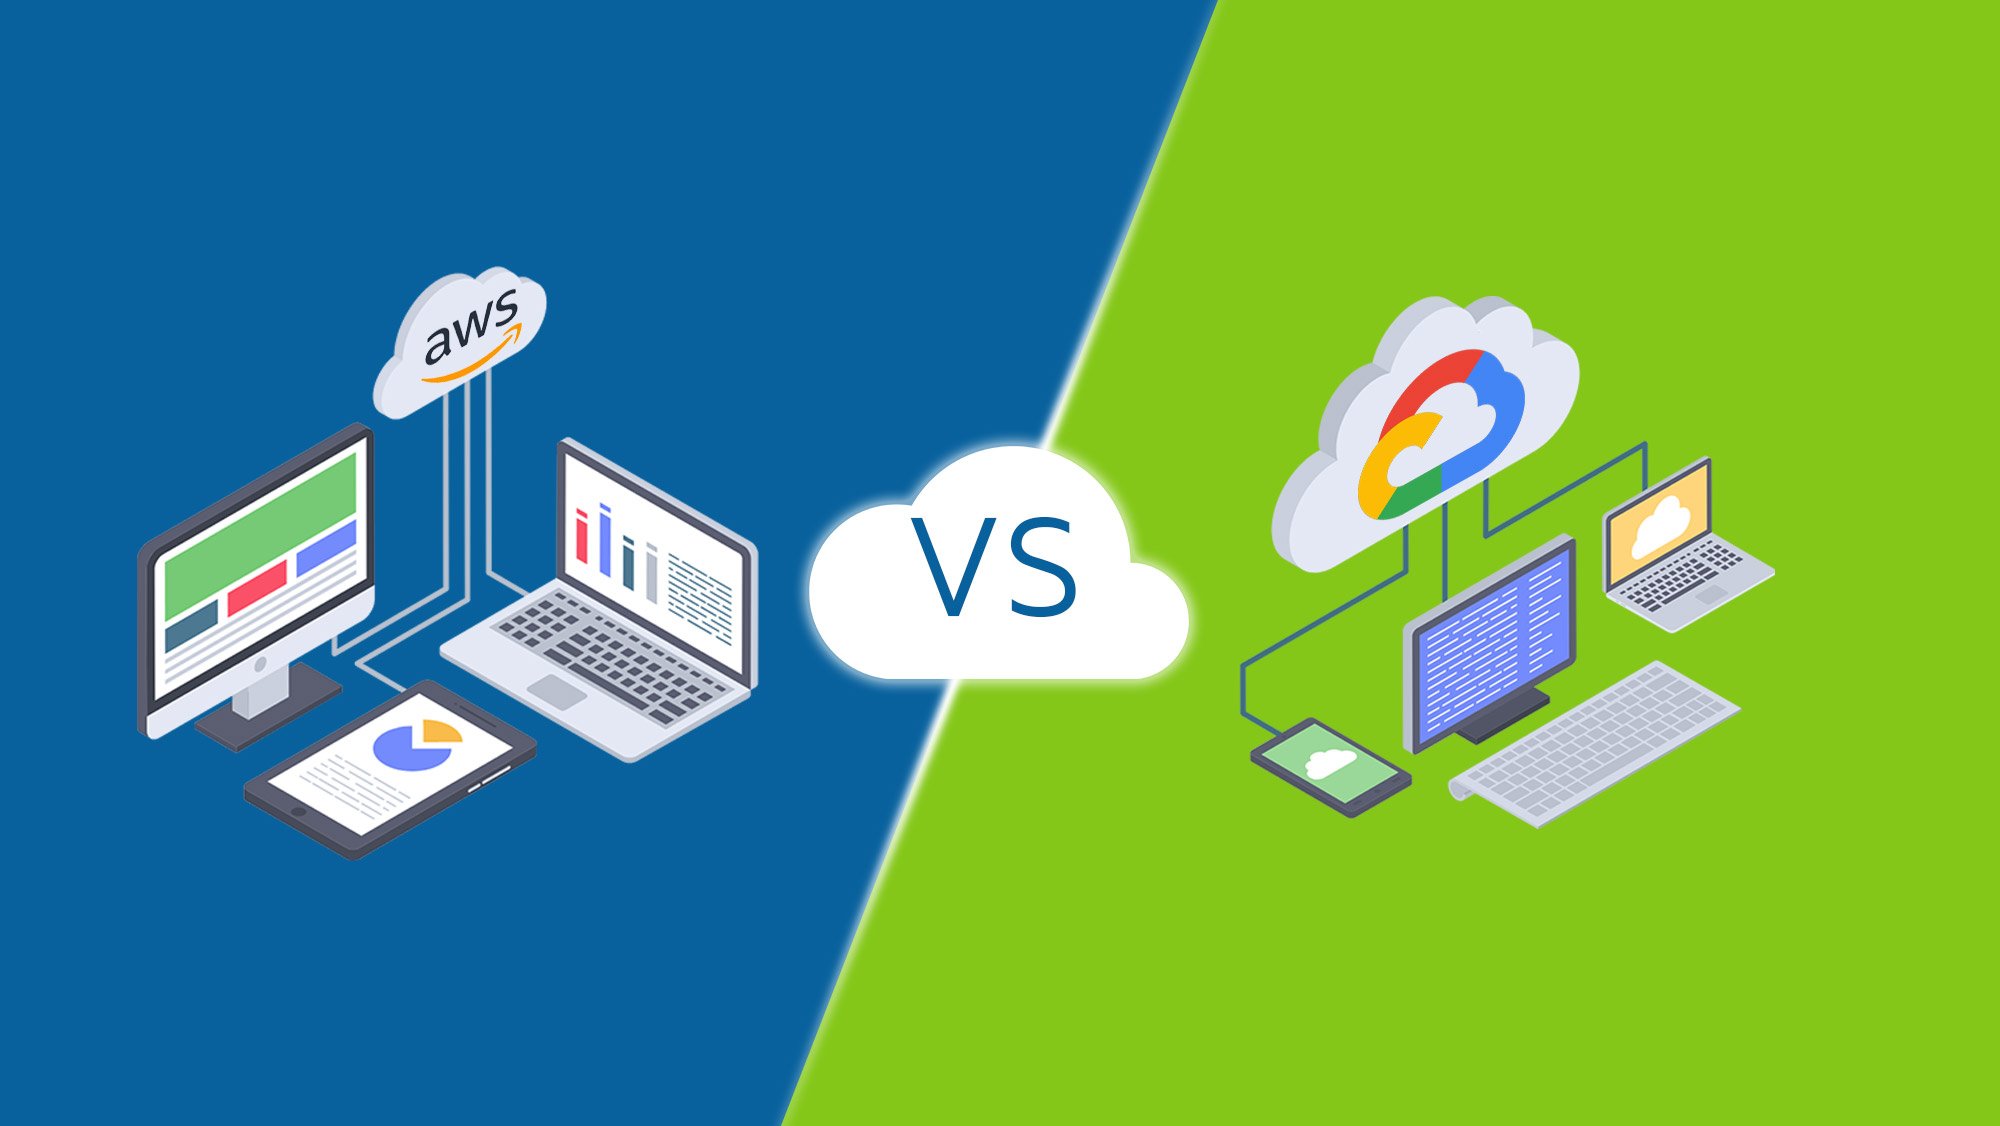 Google Cloud Services vs. Amazon Web Services: Which one is right for your business?